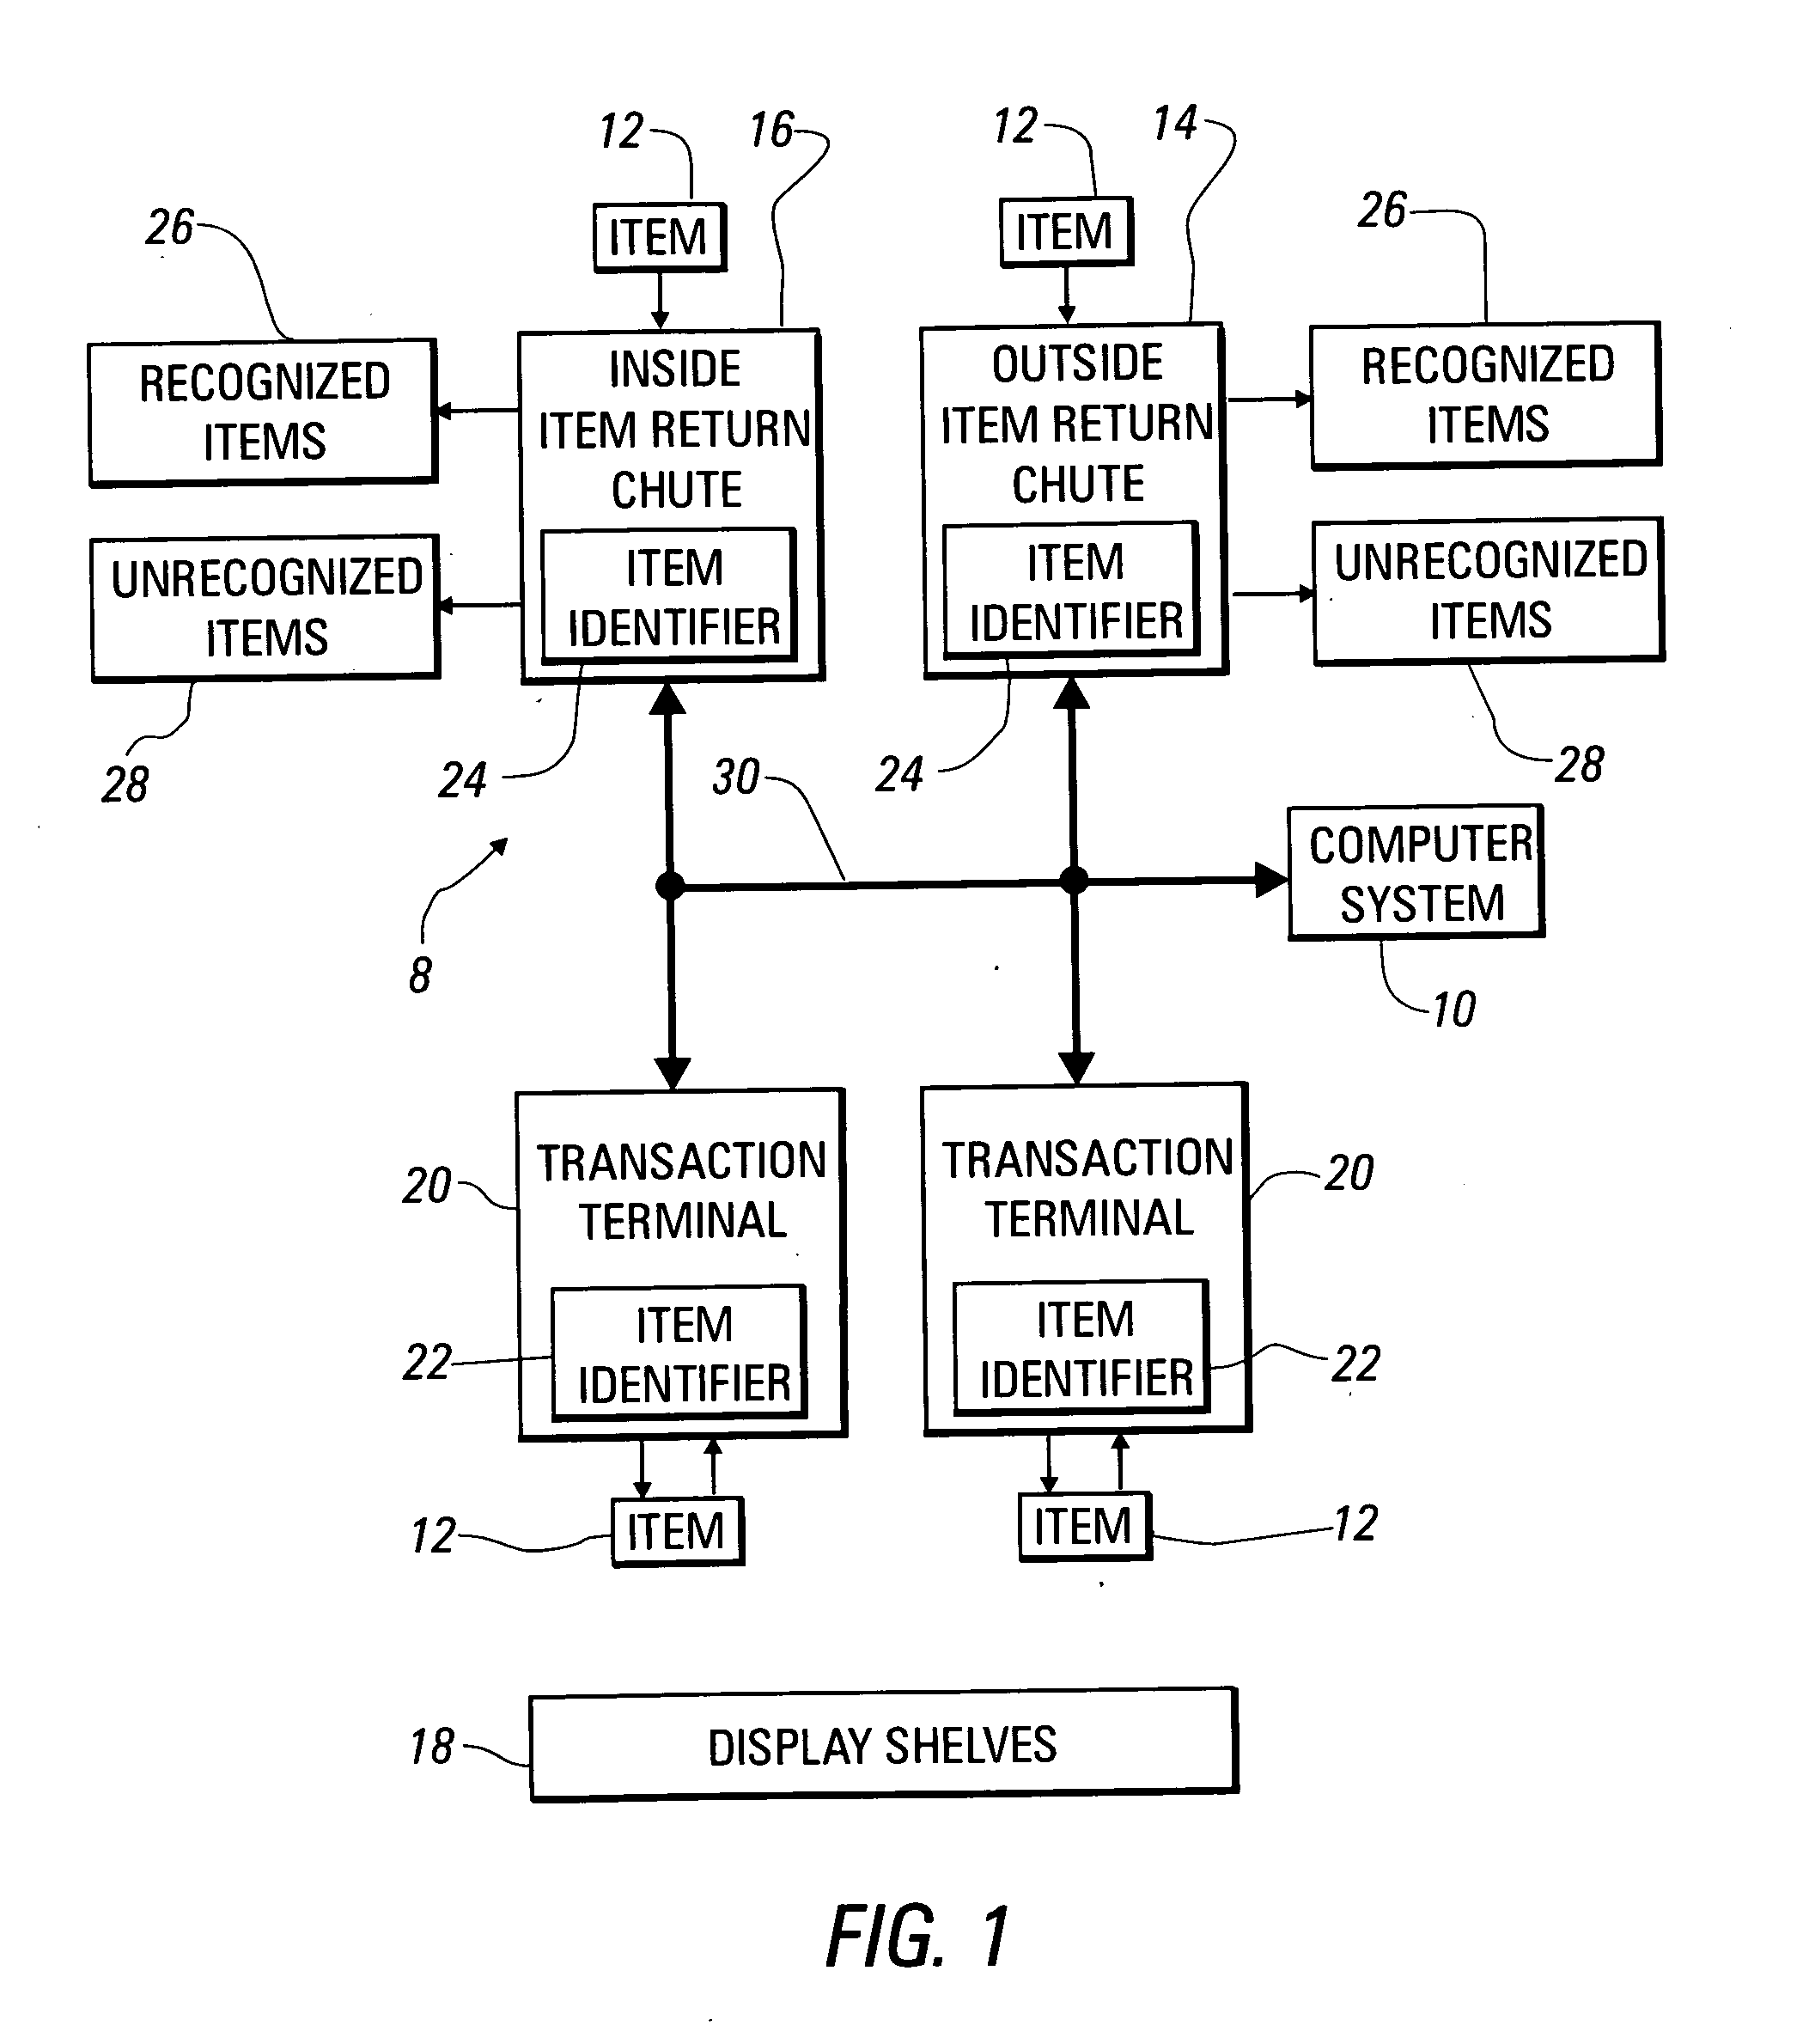 System and method for tracking the return of loaned or rented items